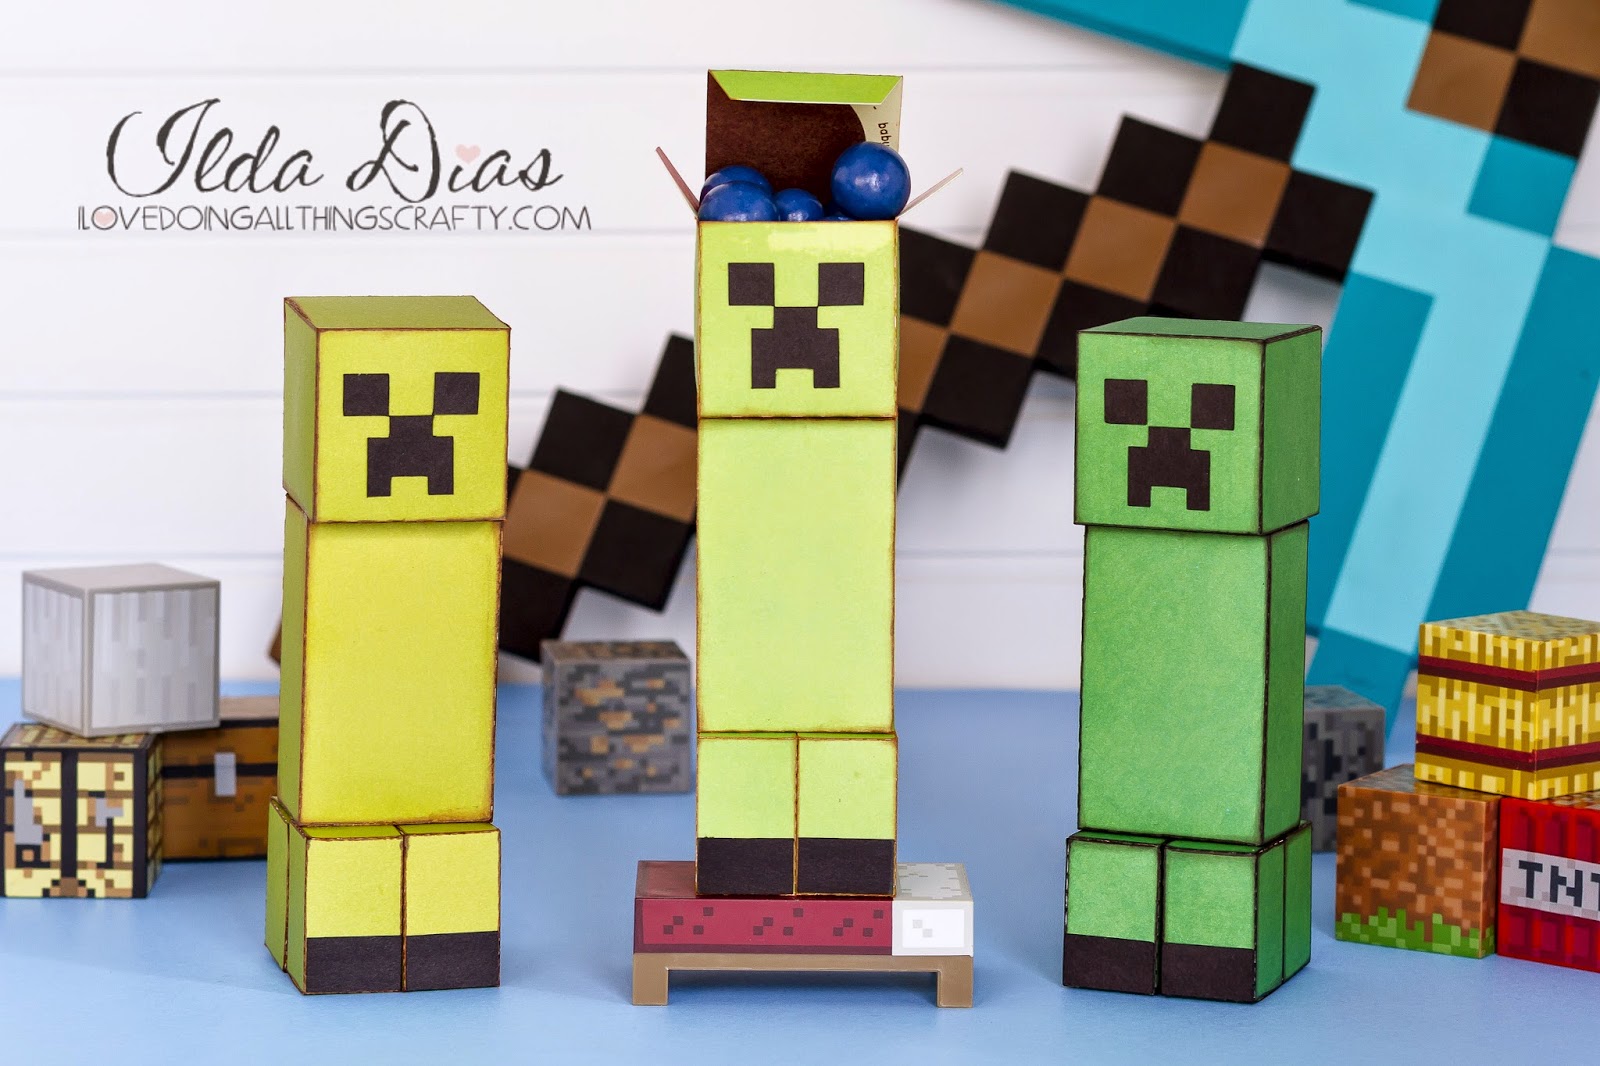 Minecraft Game - Make at home with Paper, Paper Game